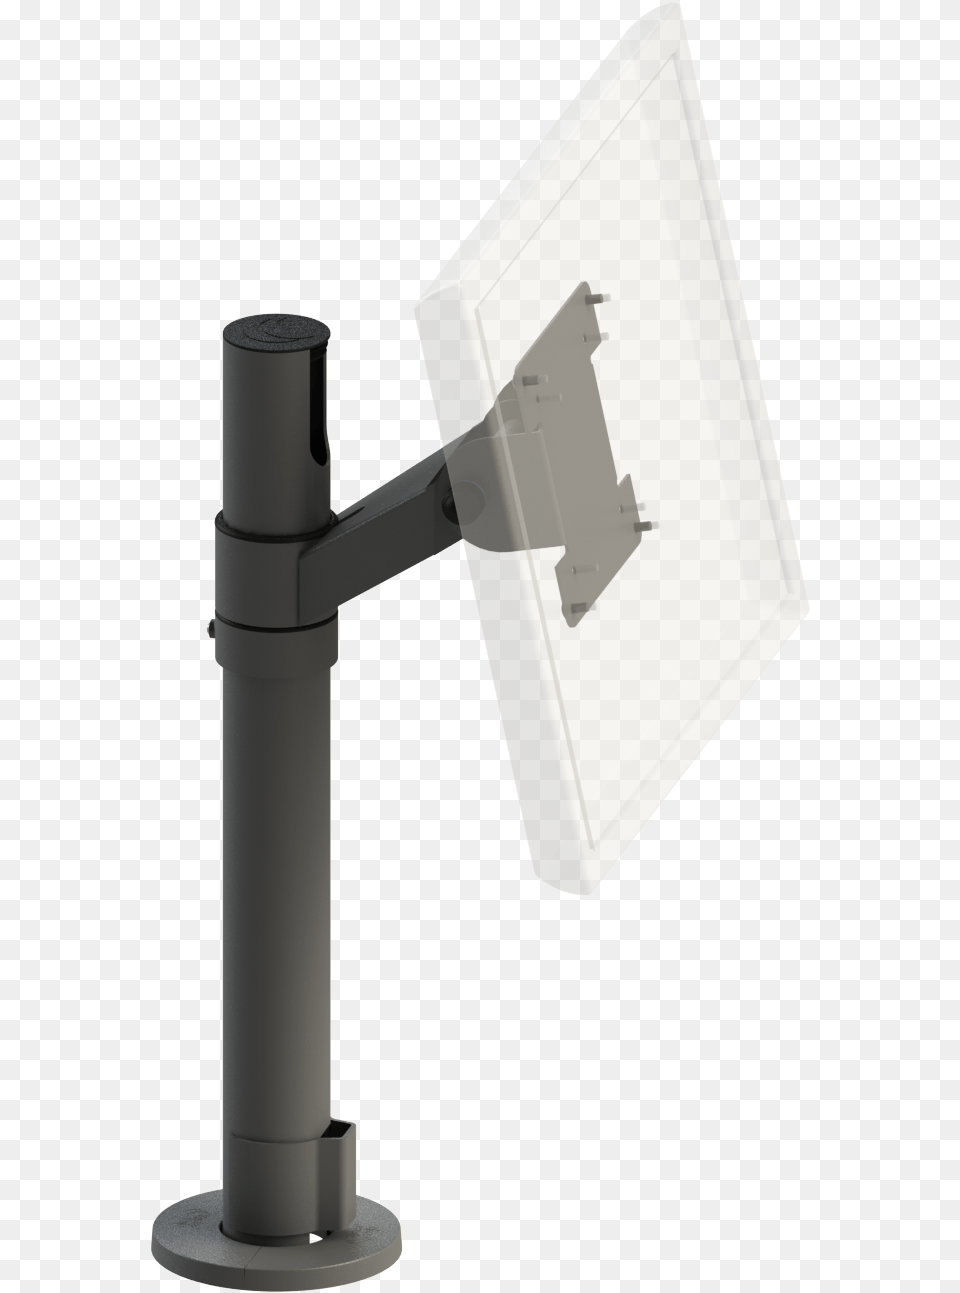 Sign, Lamp, Sink, Sink Faucet Png Image